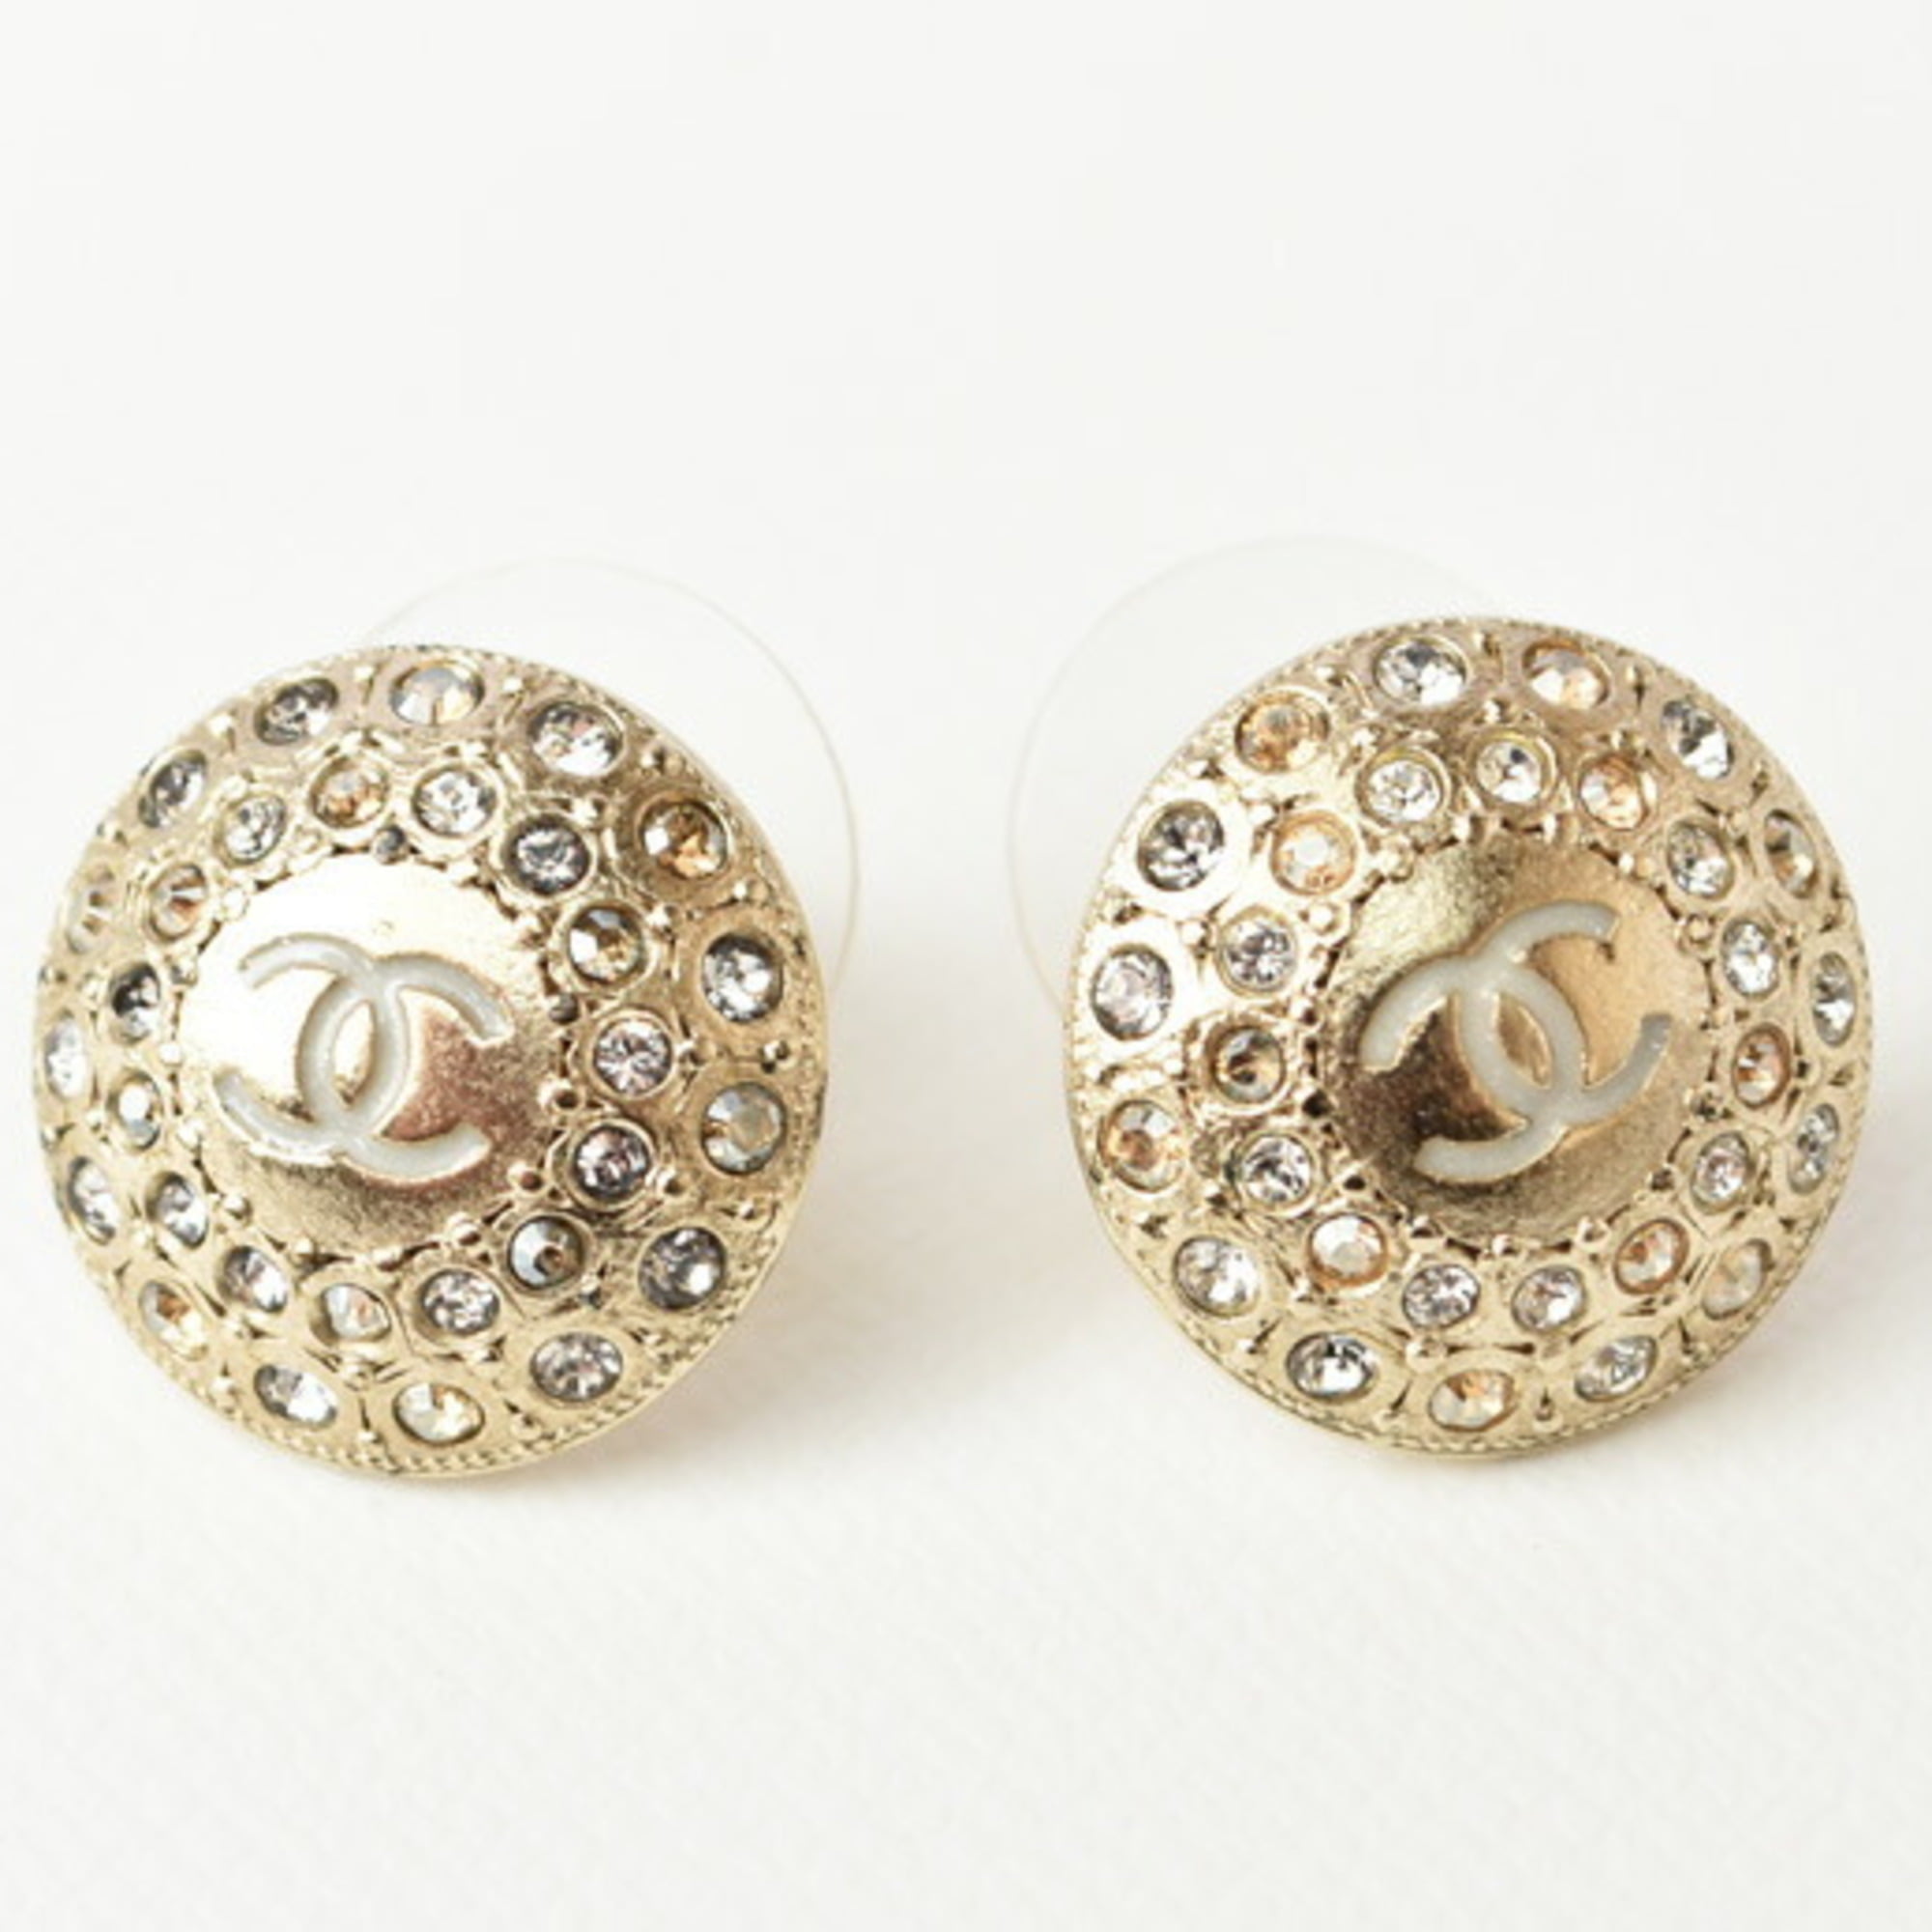 Authenticated Used Chanel earrings CHANEL circle motif rhinestone